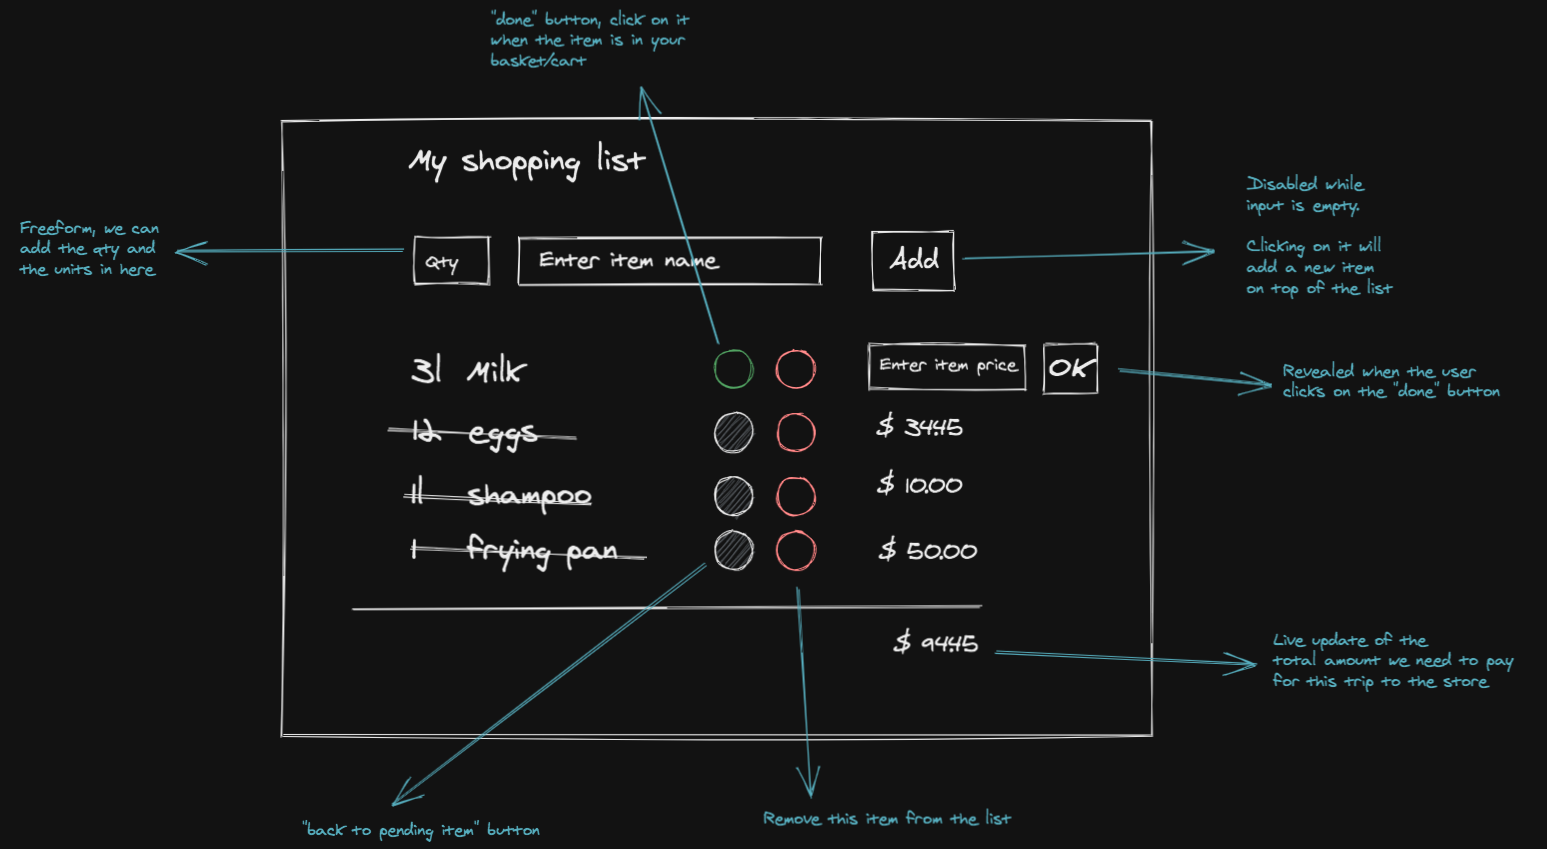 A wireframe of what the Shopping list looks like.